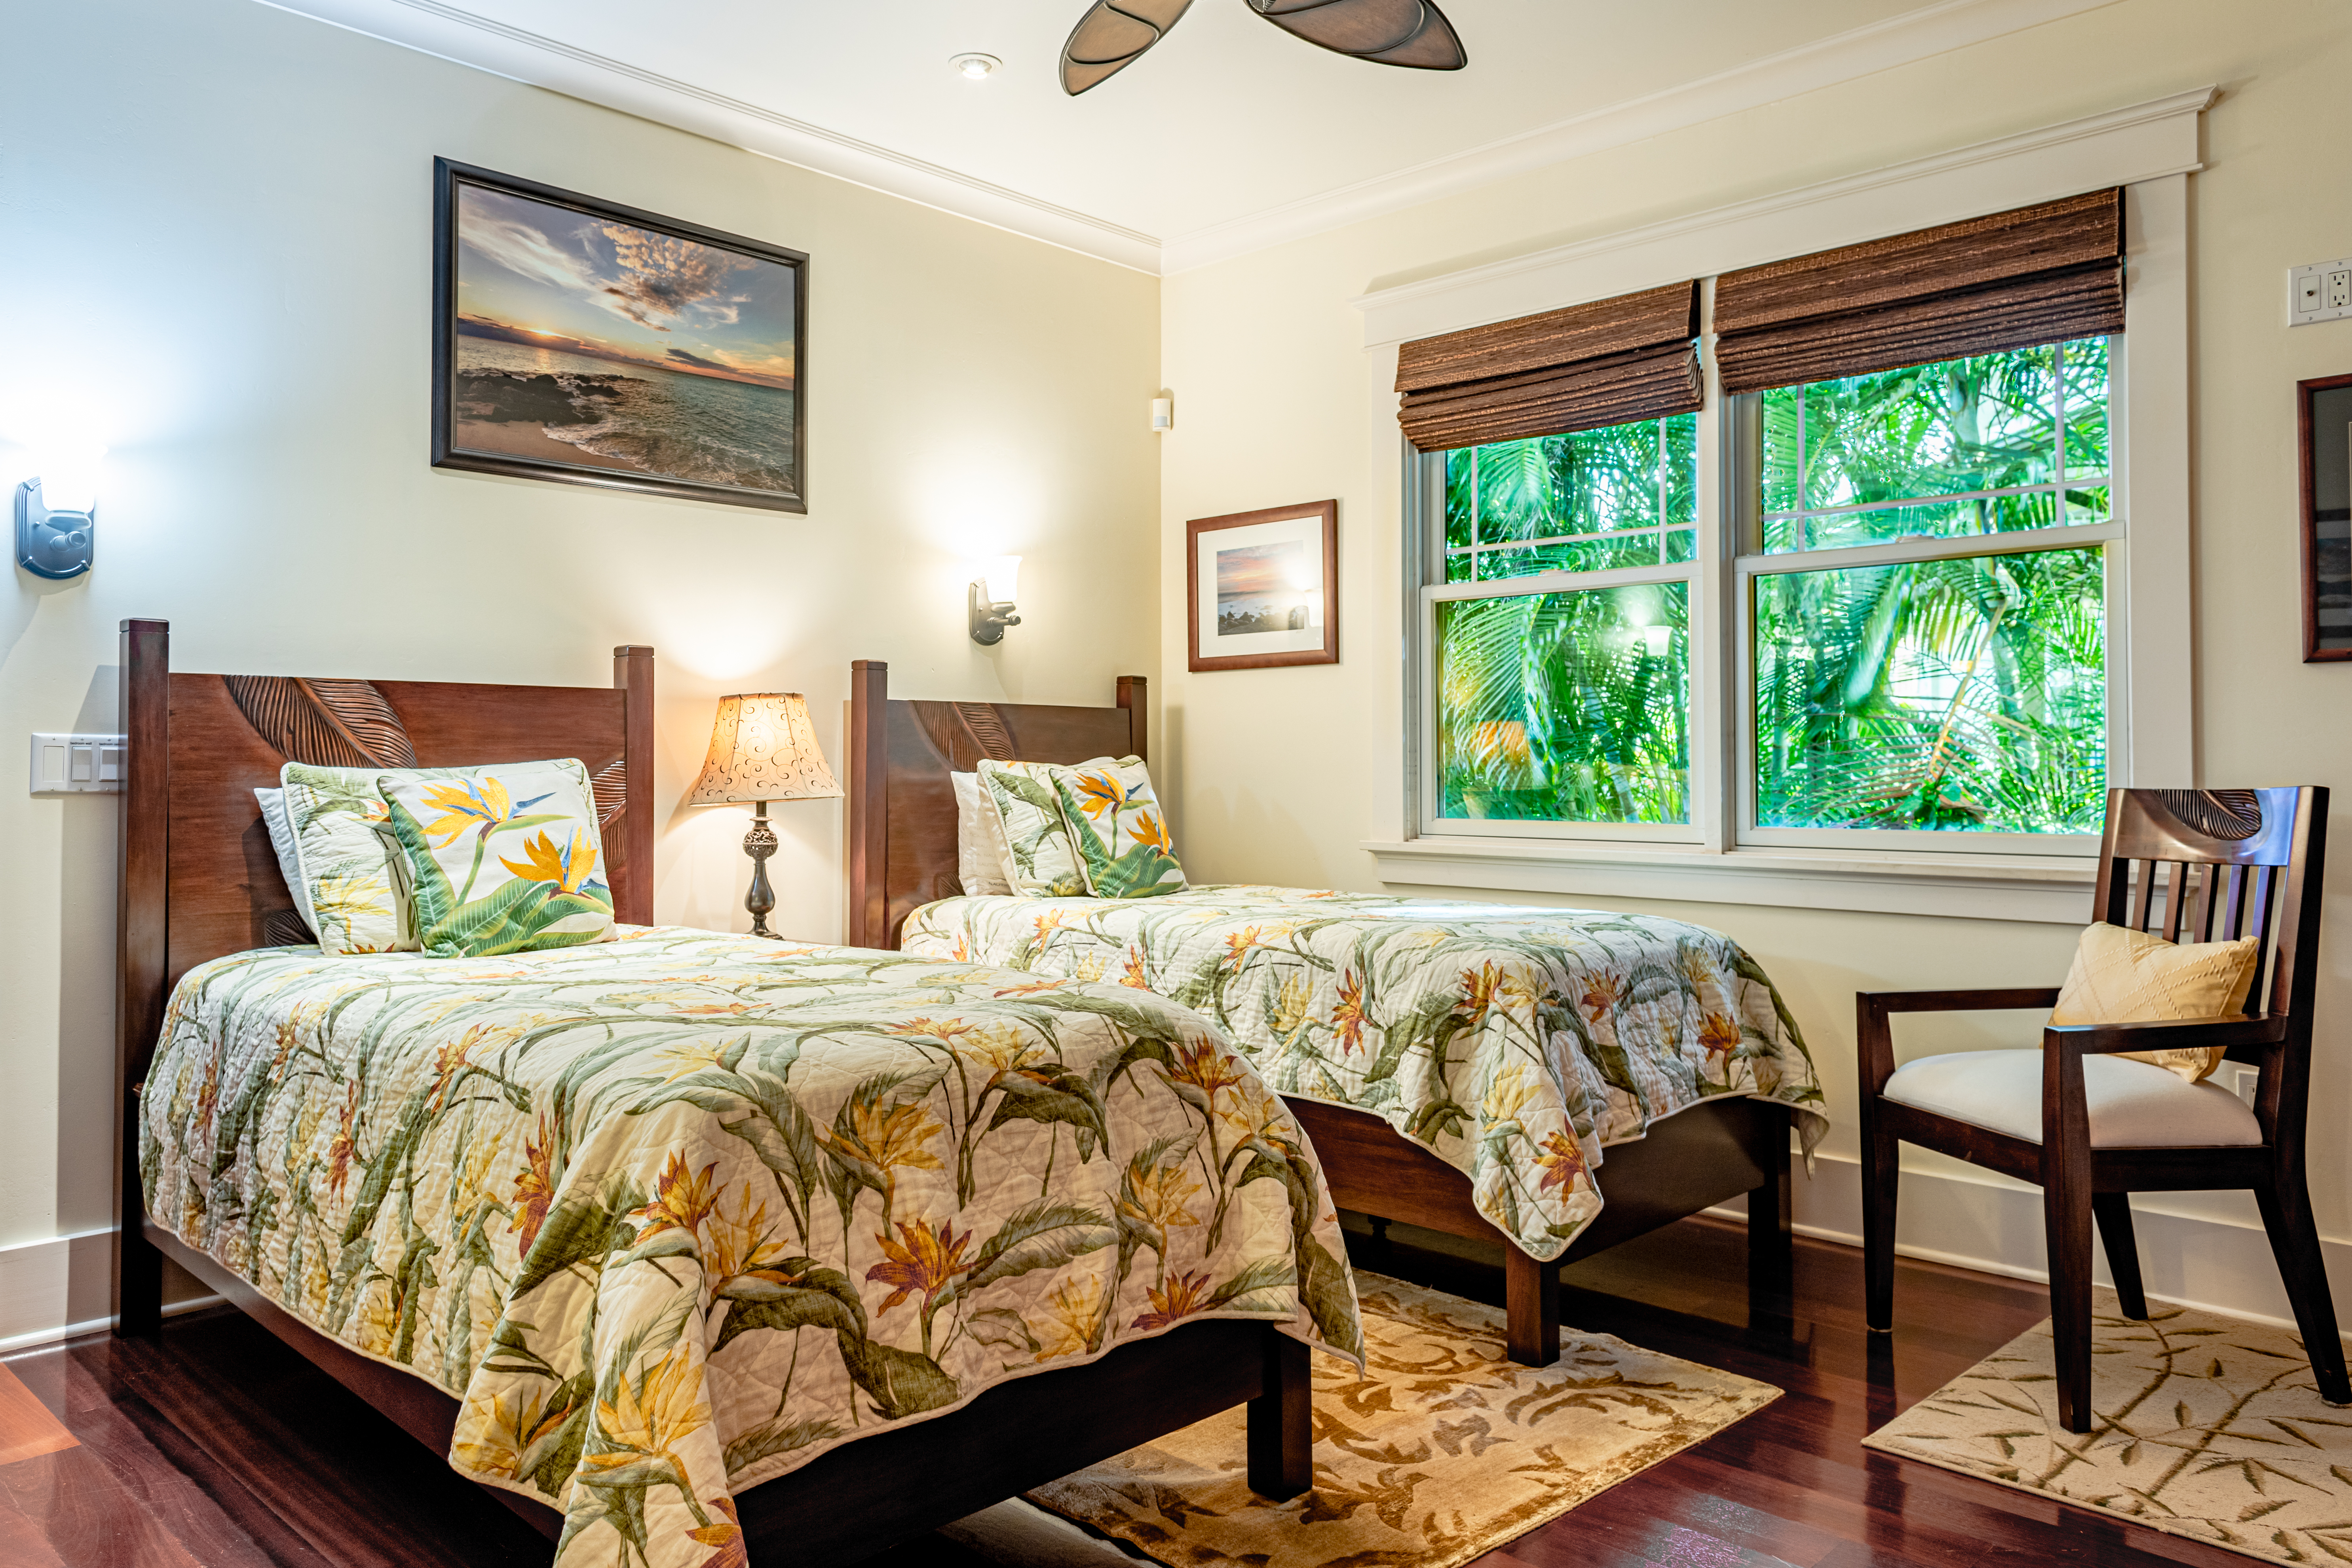 The third bedroom has twin beds and is ensuite with private bathroom and green garden views.